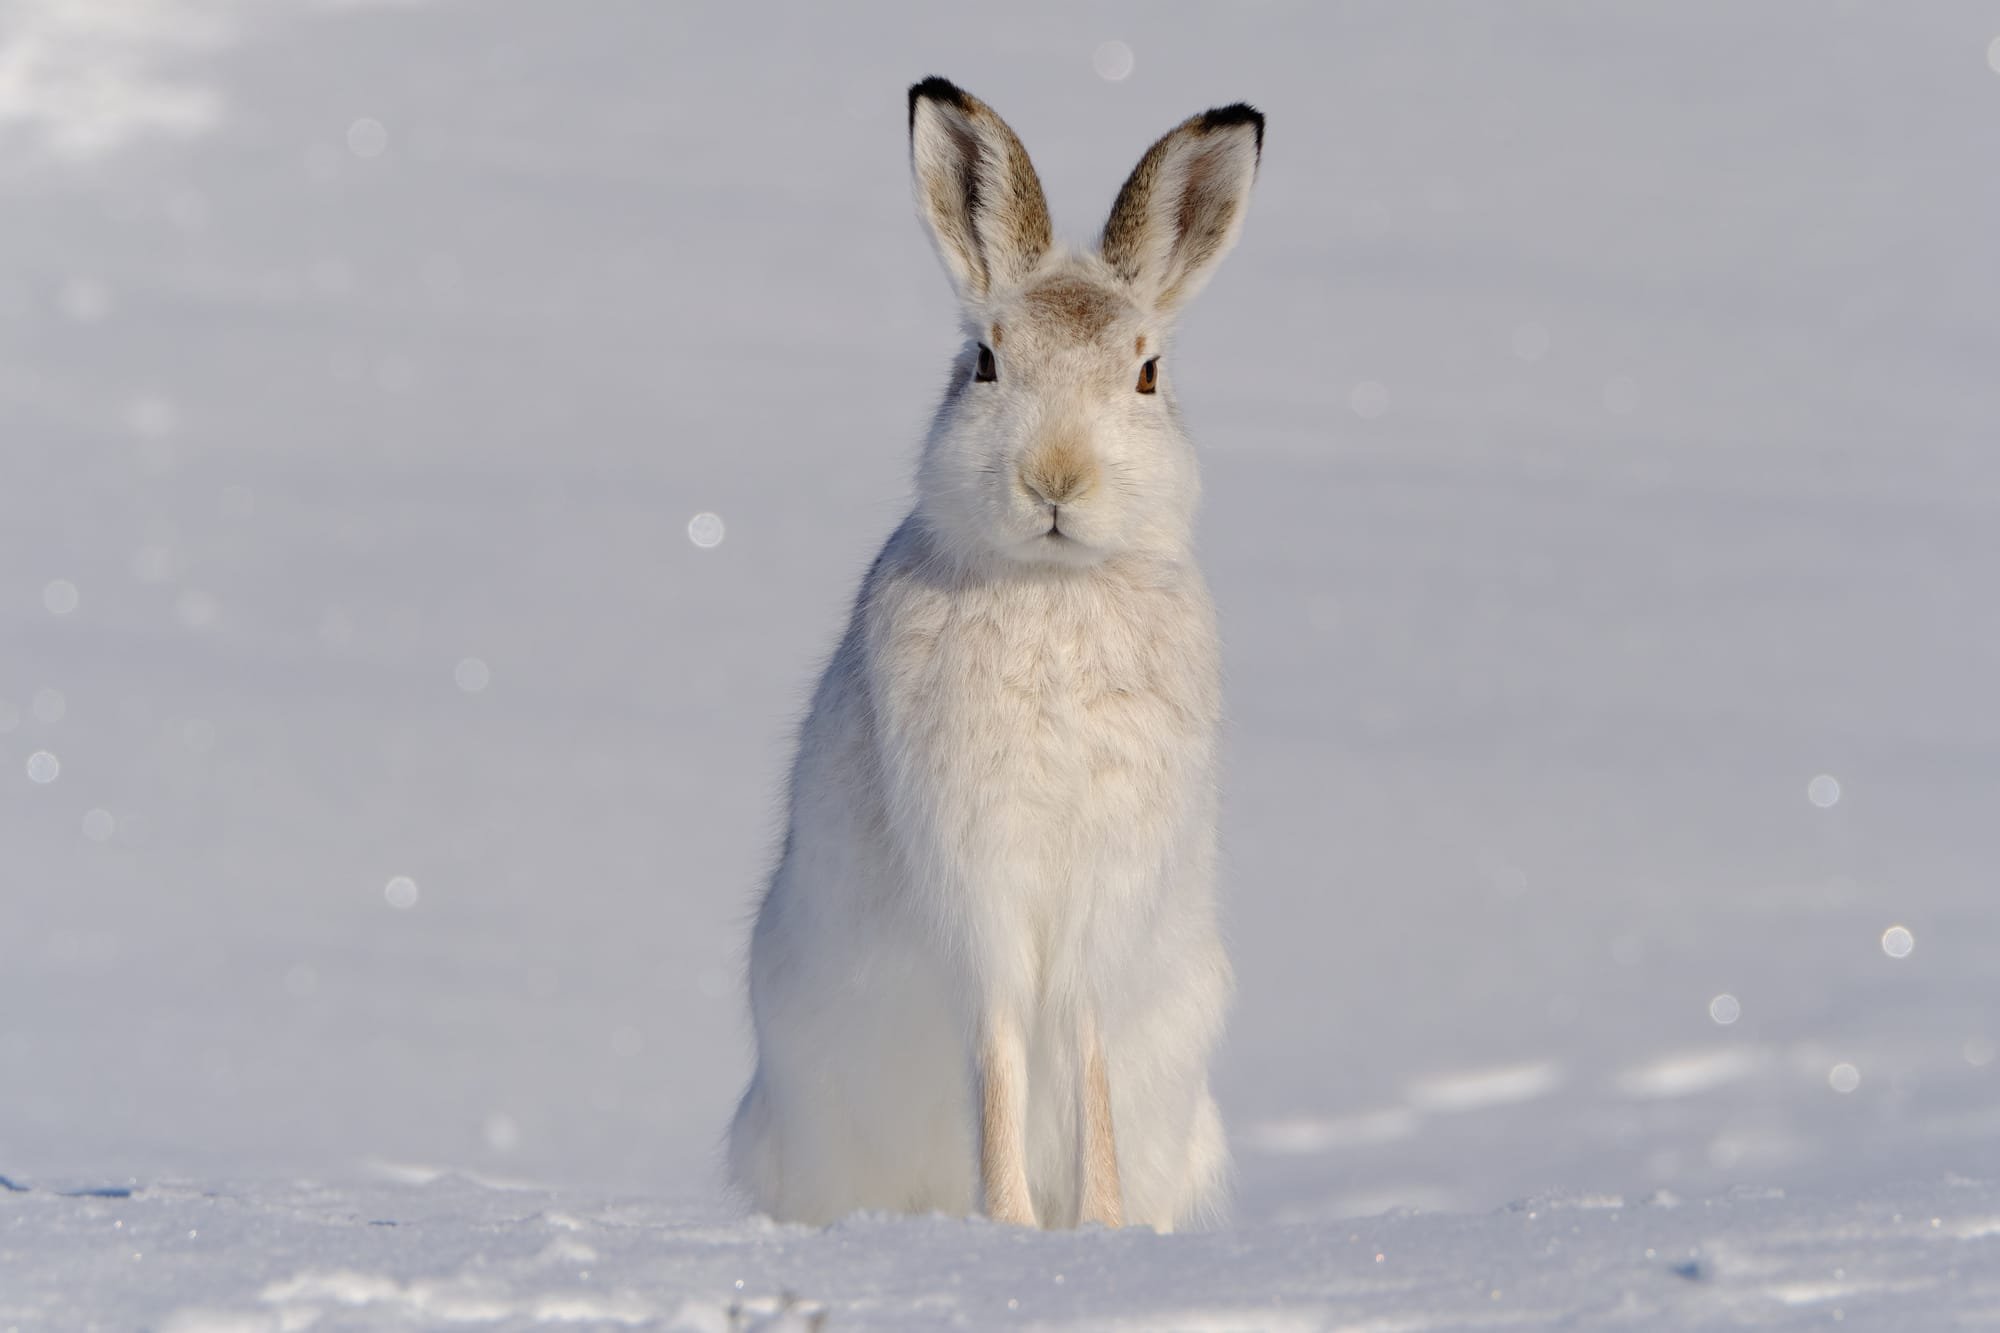 Mountain Hare photography workshops